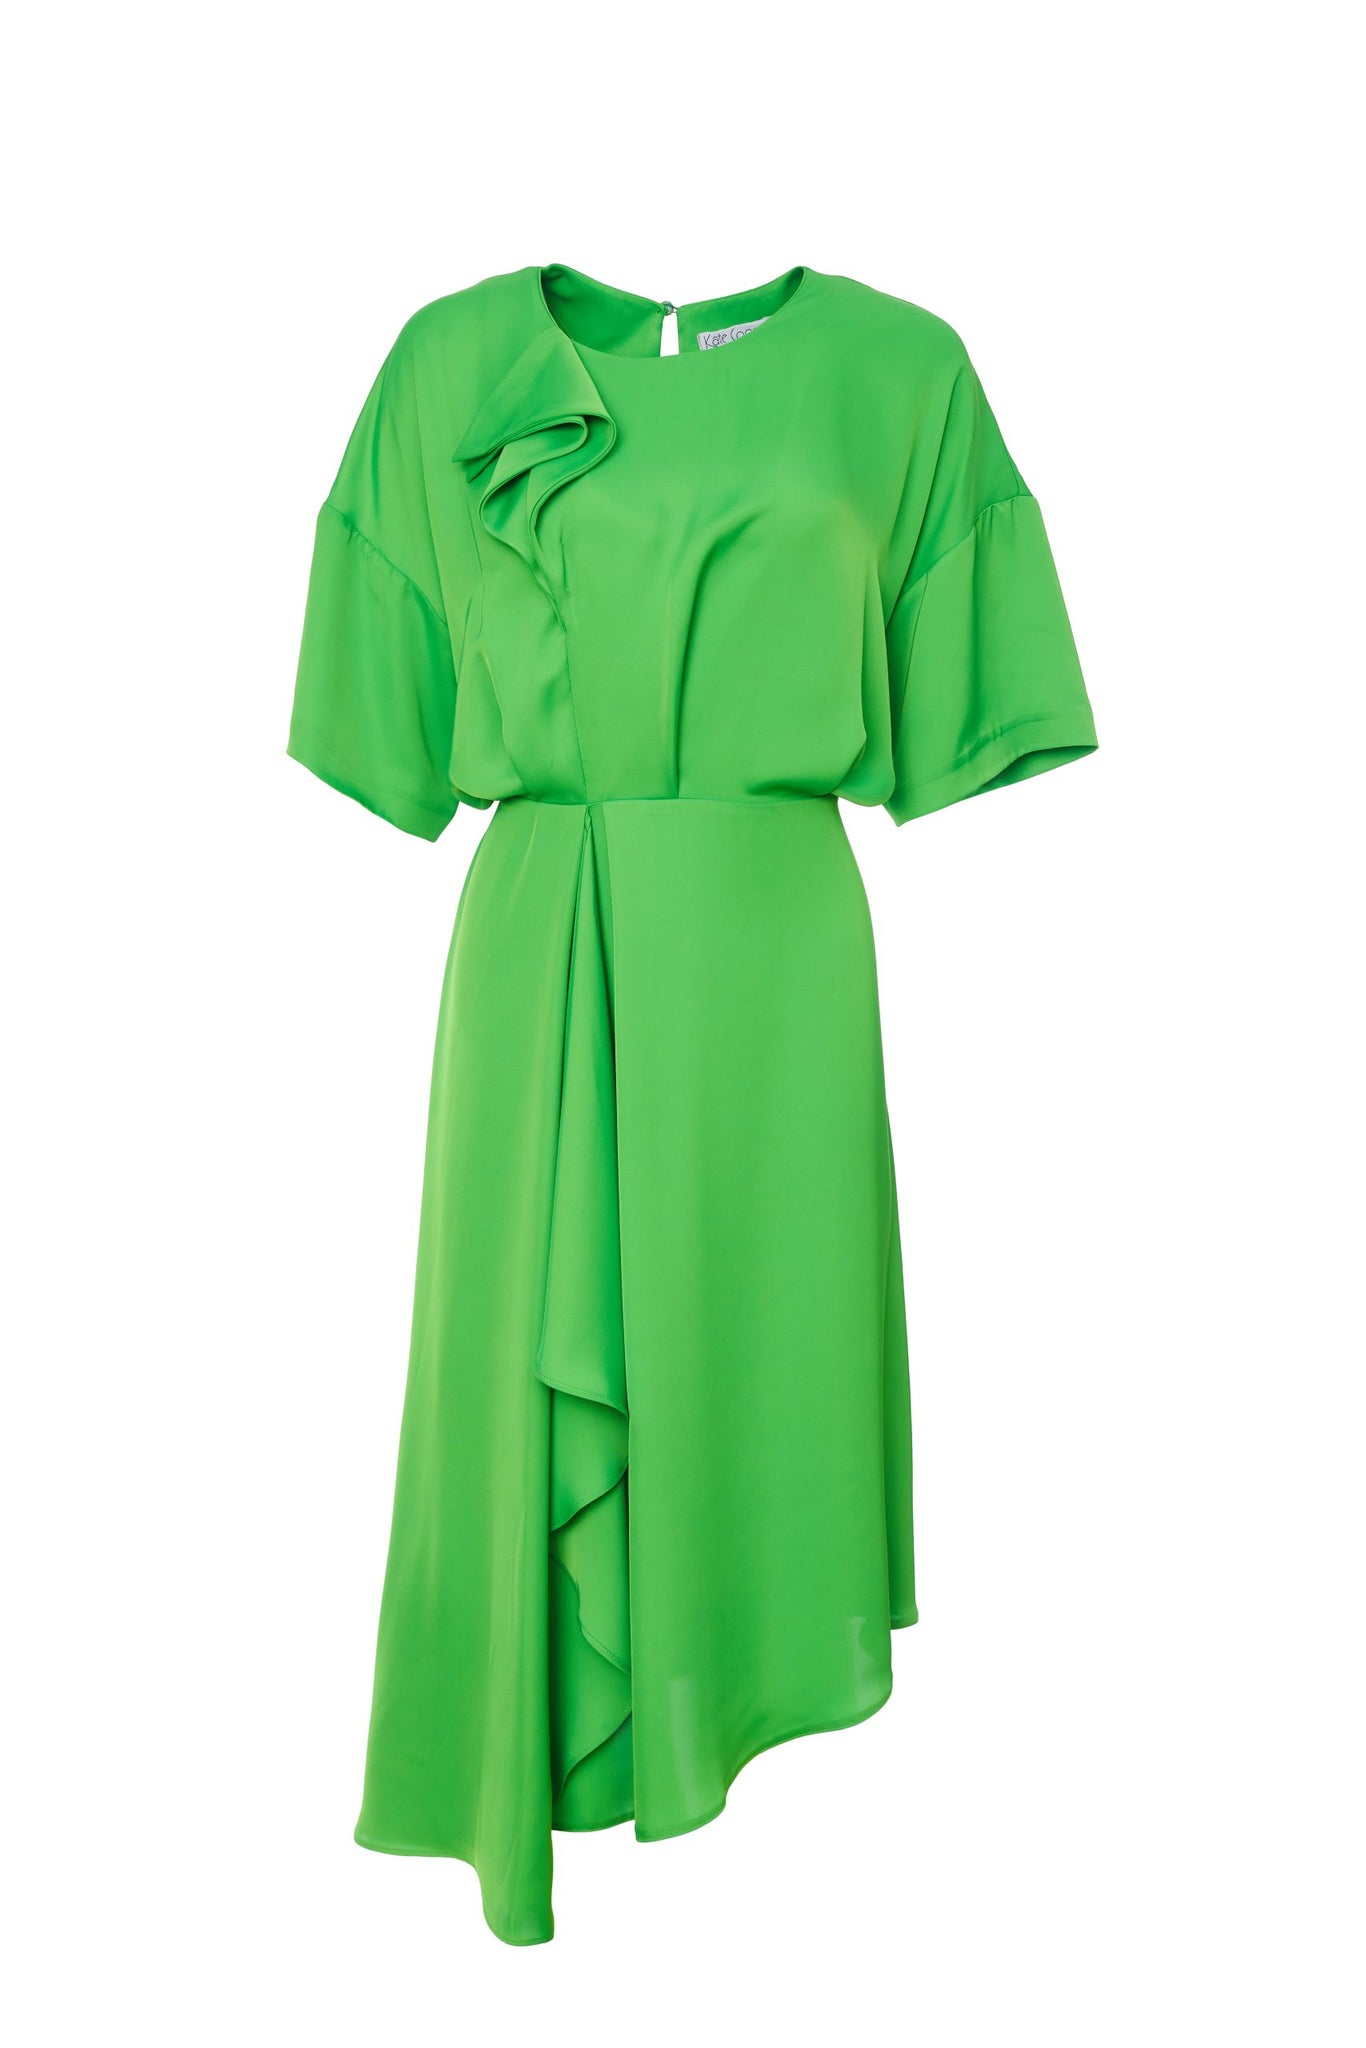 Kate Cooper Angle hem dress with fold detail in Apple Green